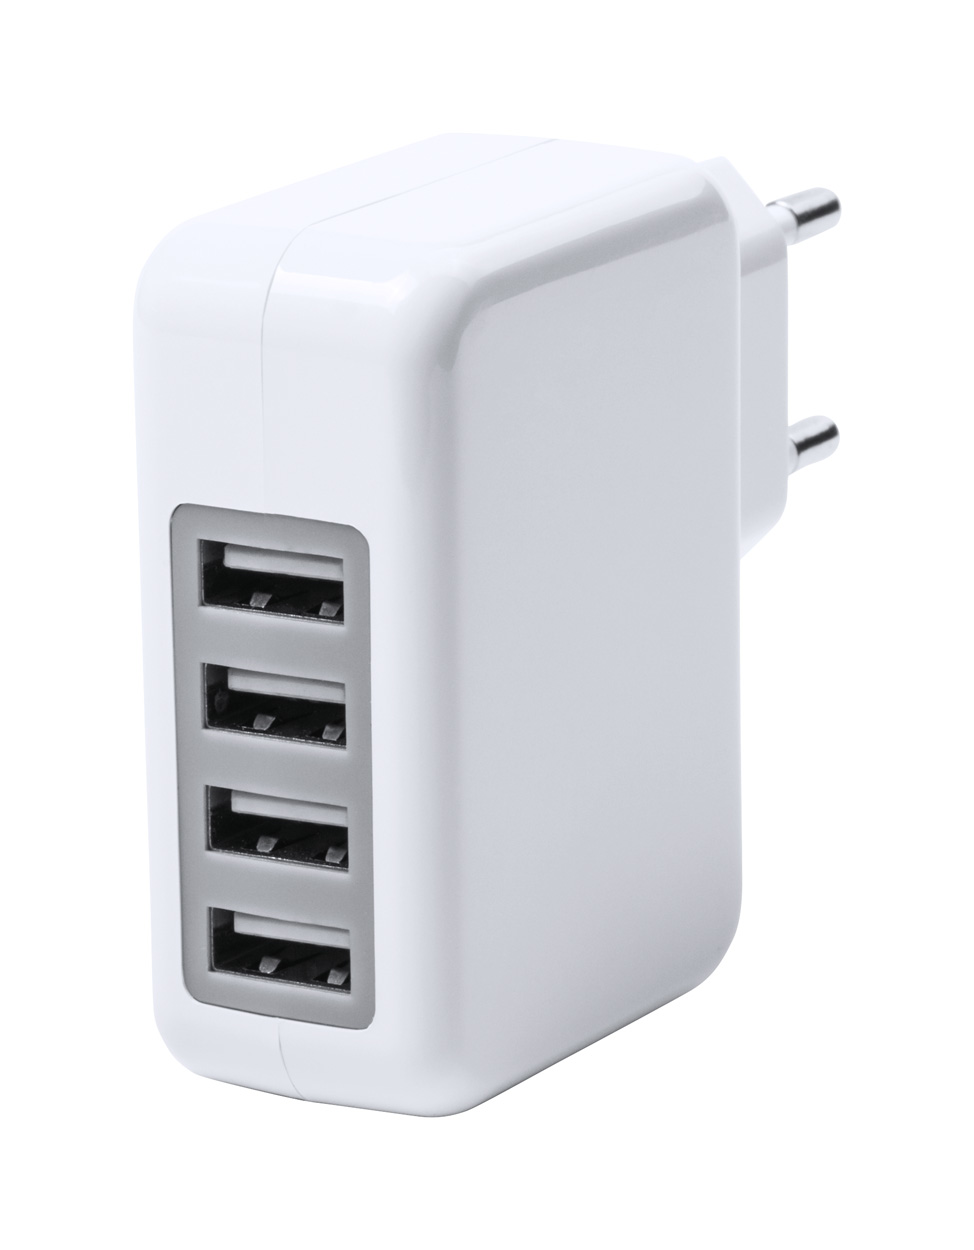 Promo Gregor USB wall charger